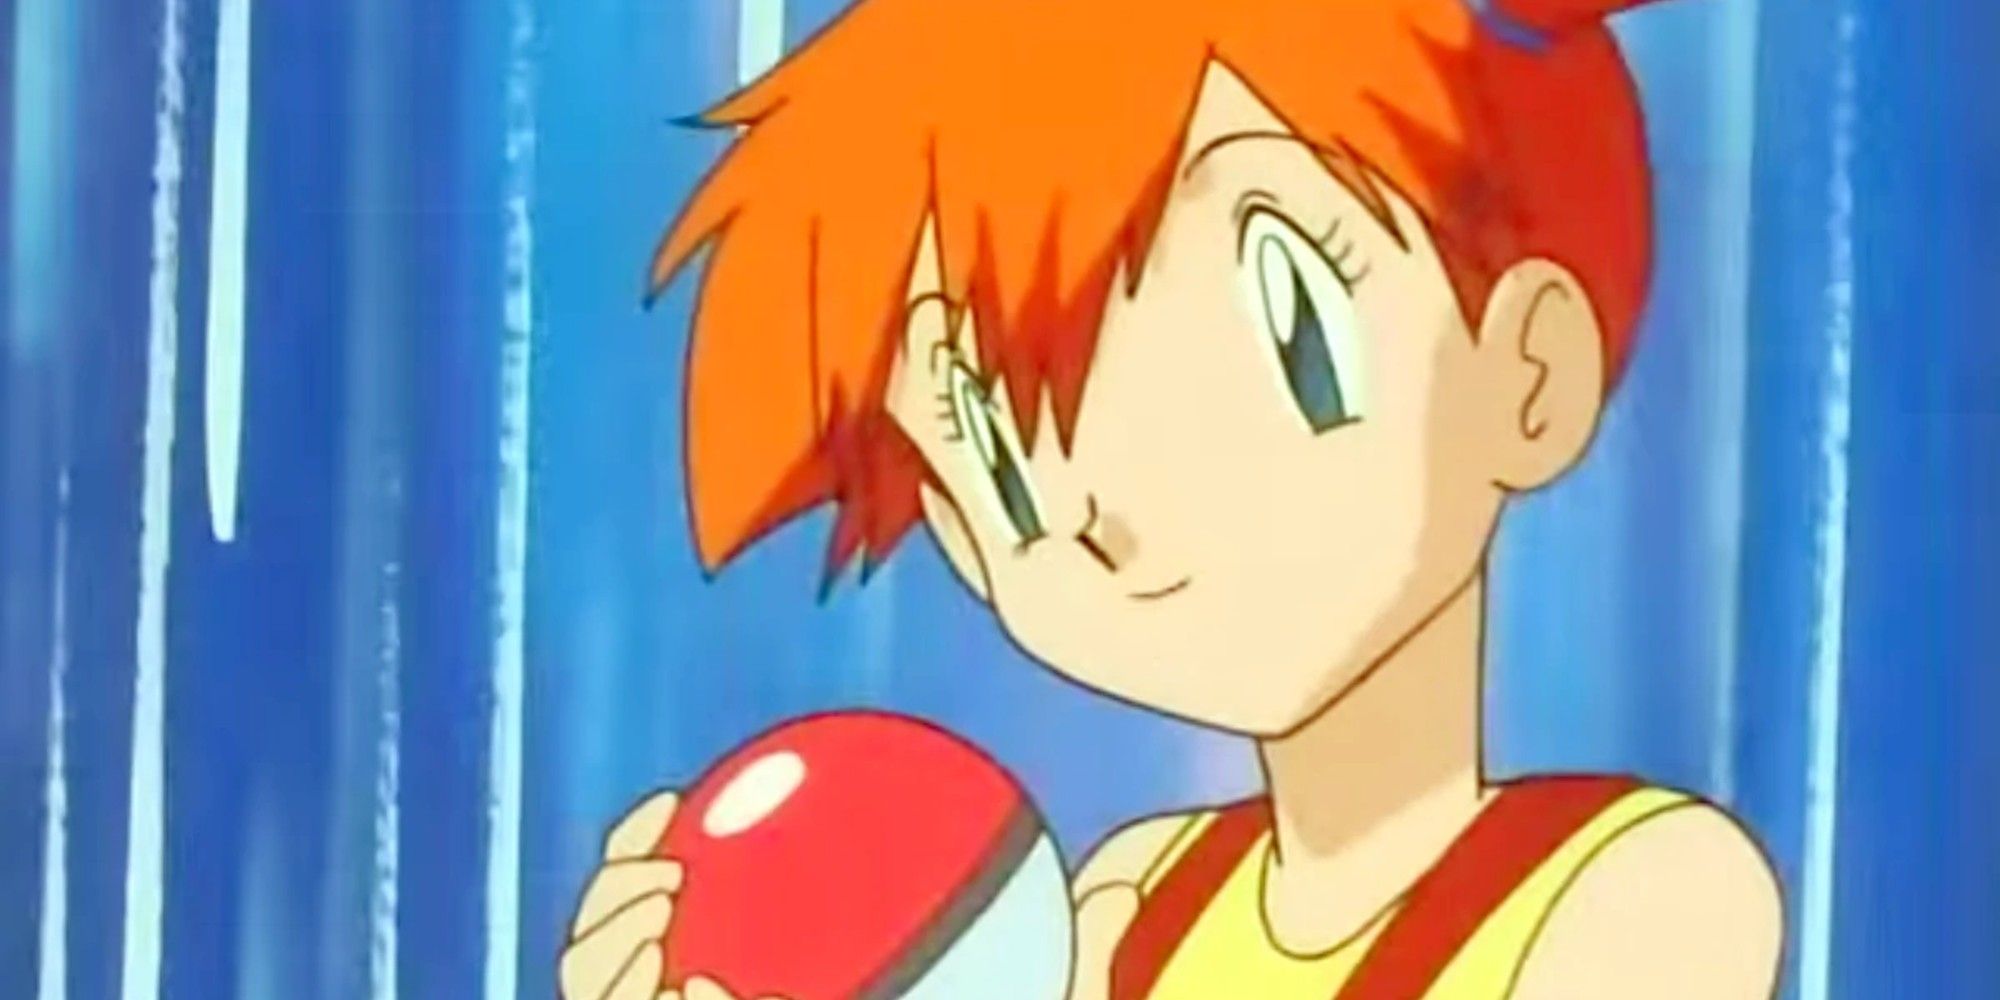 Misty from the Pokemon anime, looking calm and holding a Poke ball